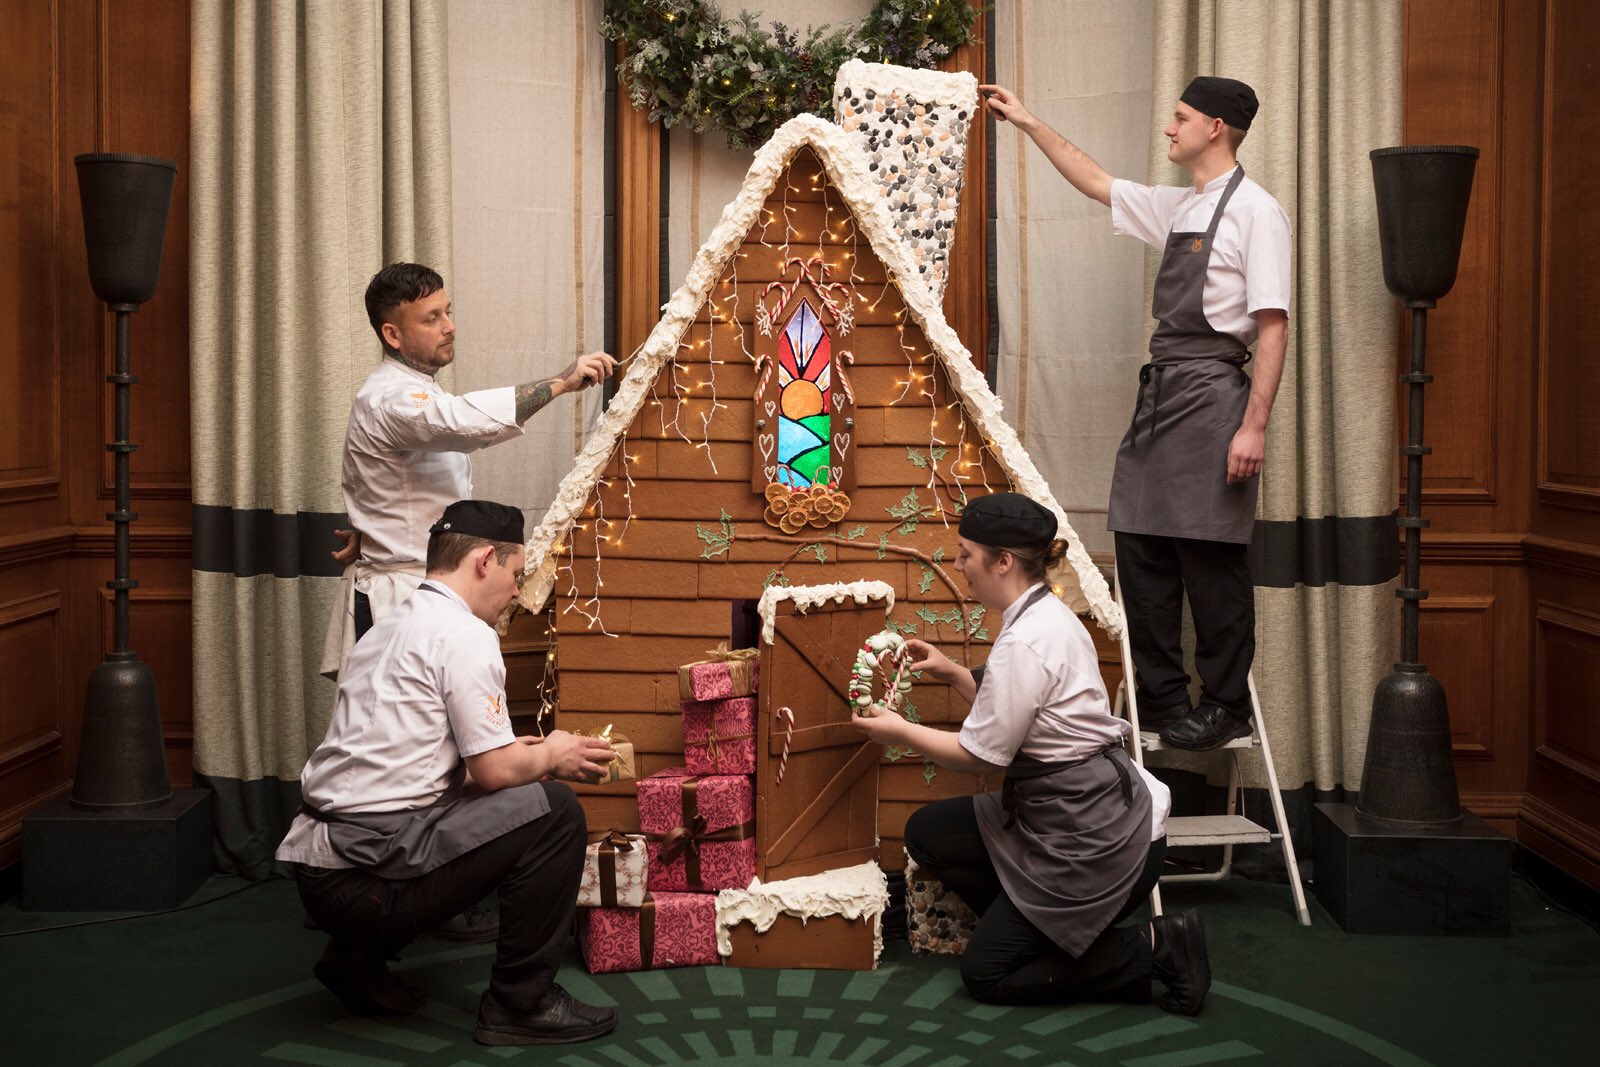 And finally... Two metre high edible gingerbread house unveiled at Gleneagles